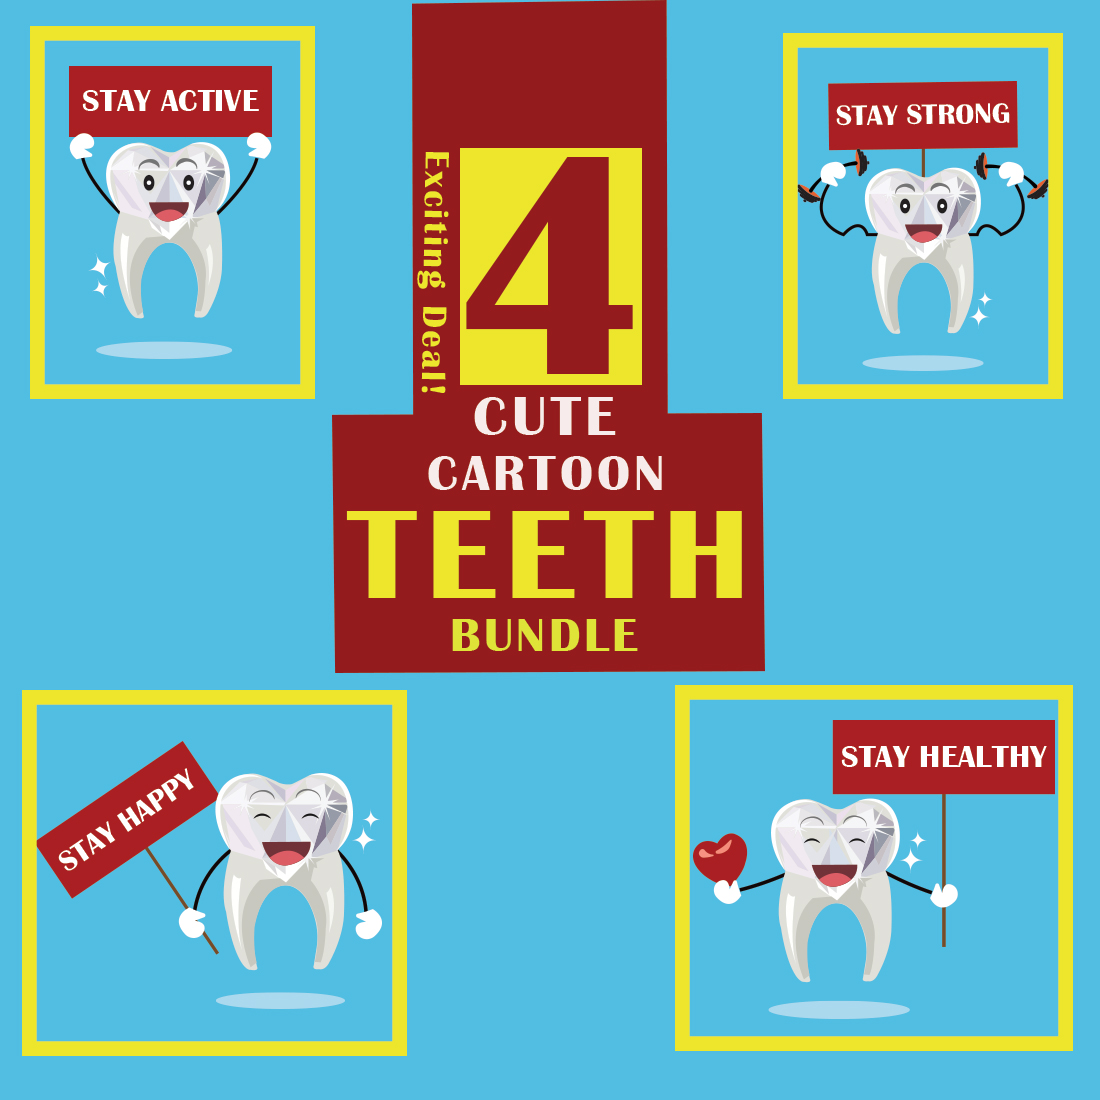 4 Cute Cartoon teeth High Quality Vector Illustration for DENTAL purposes cover image.